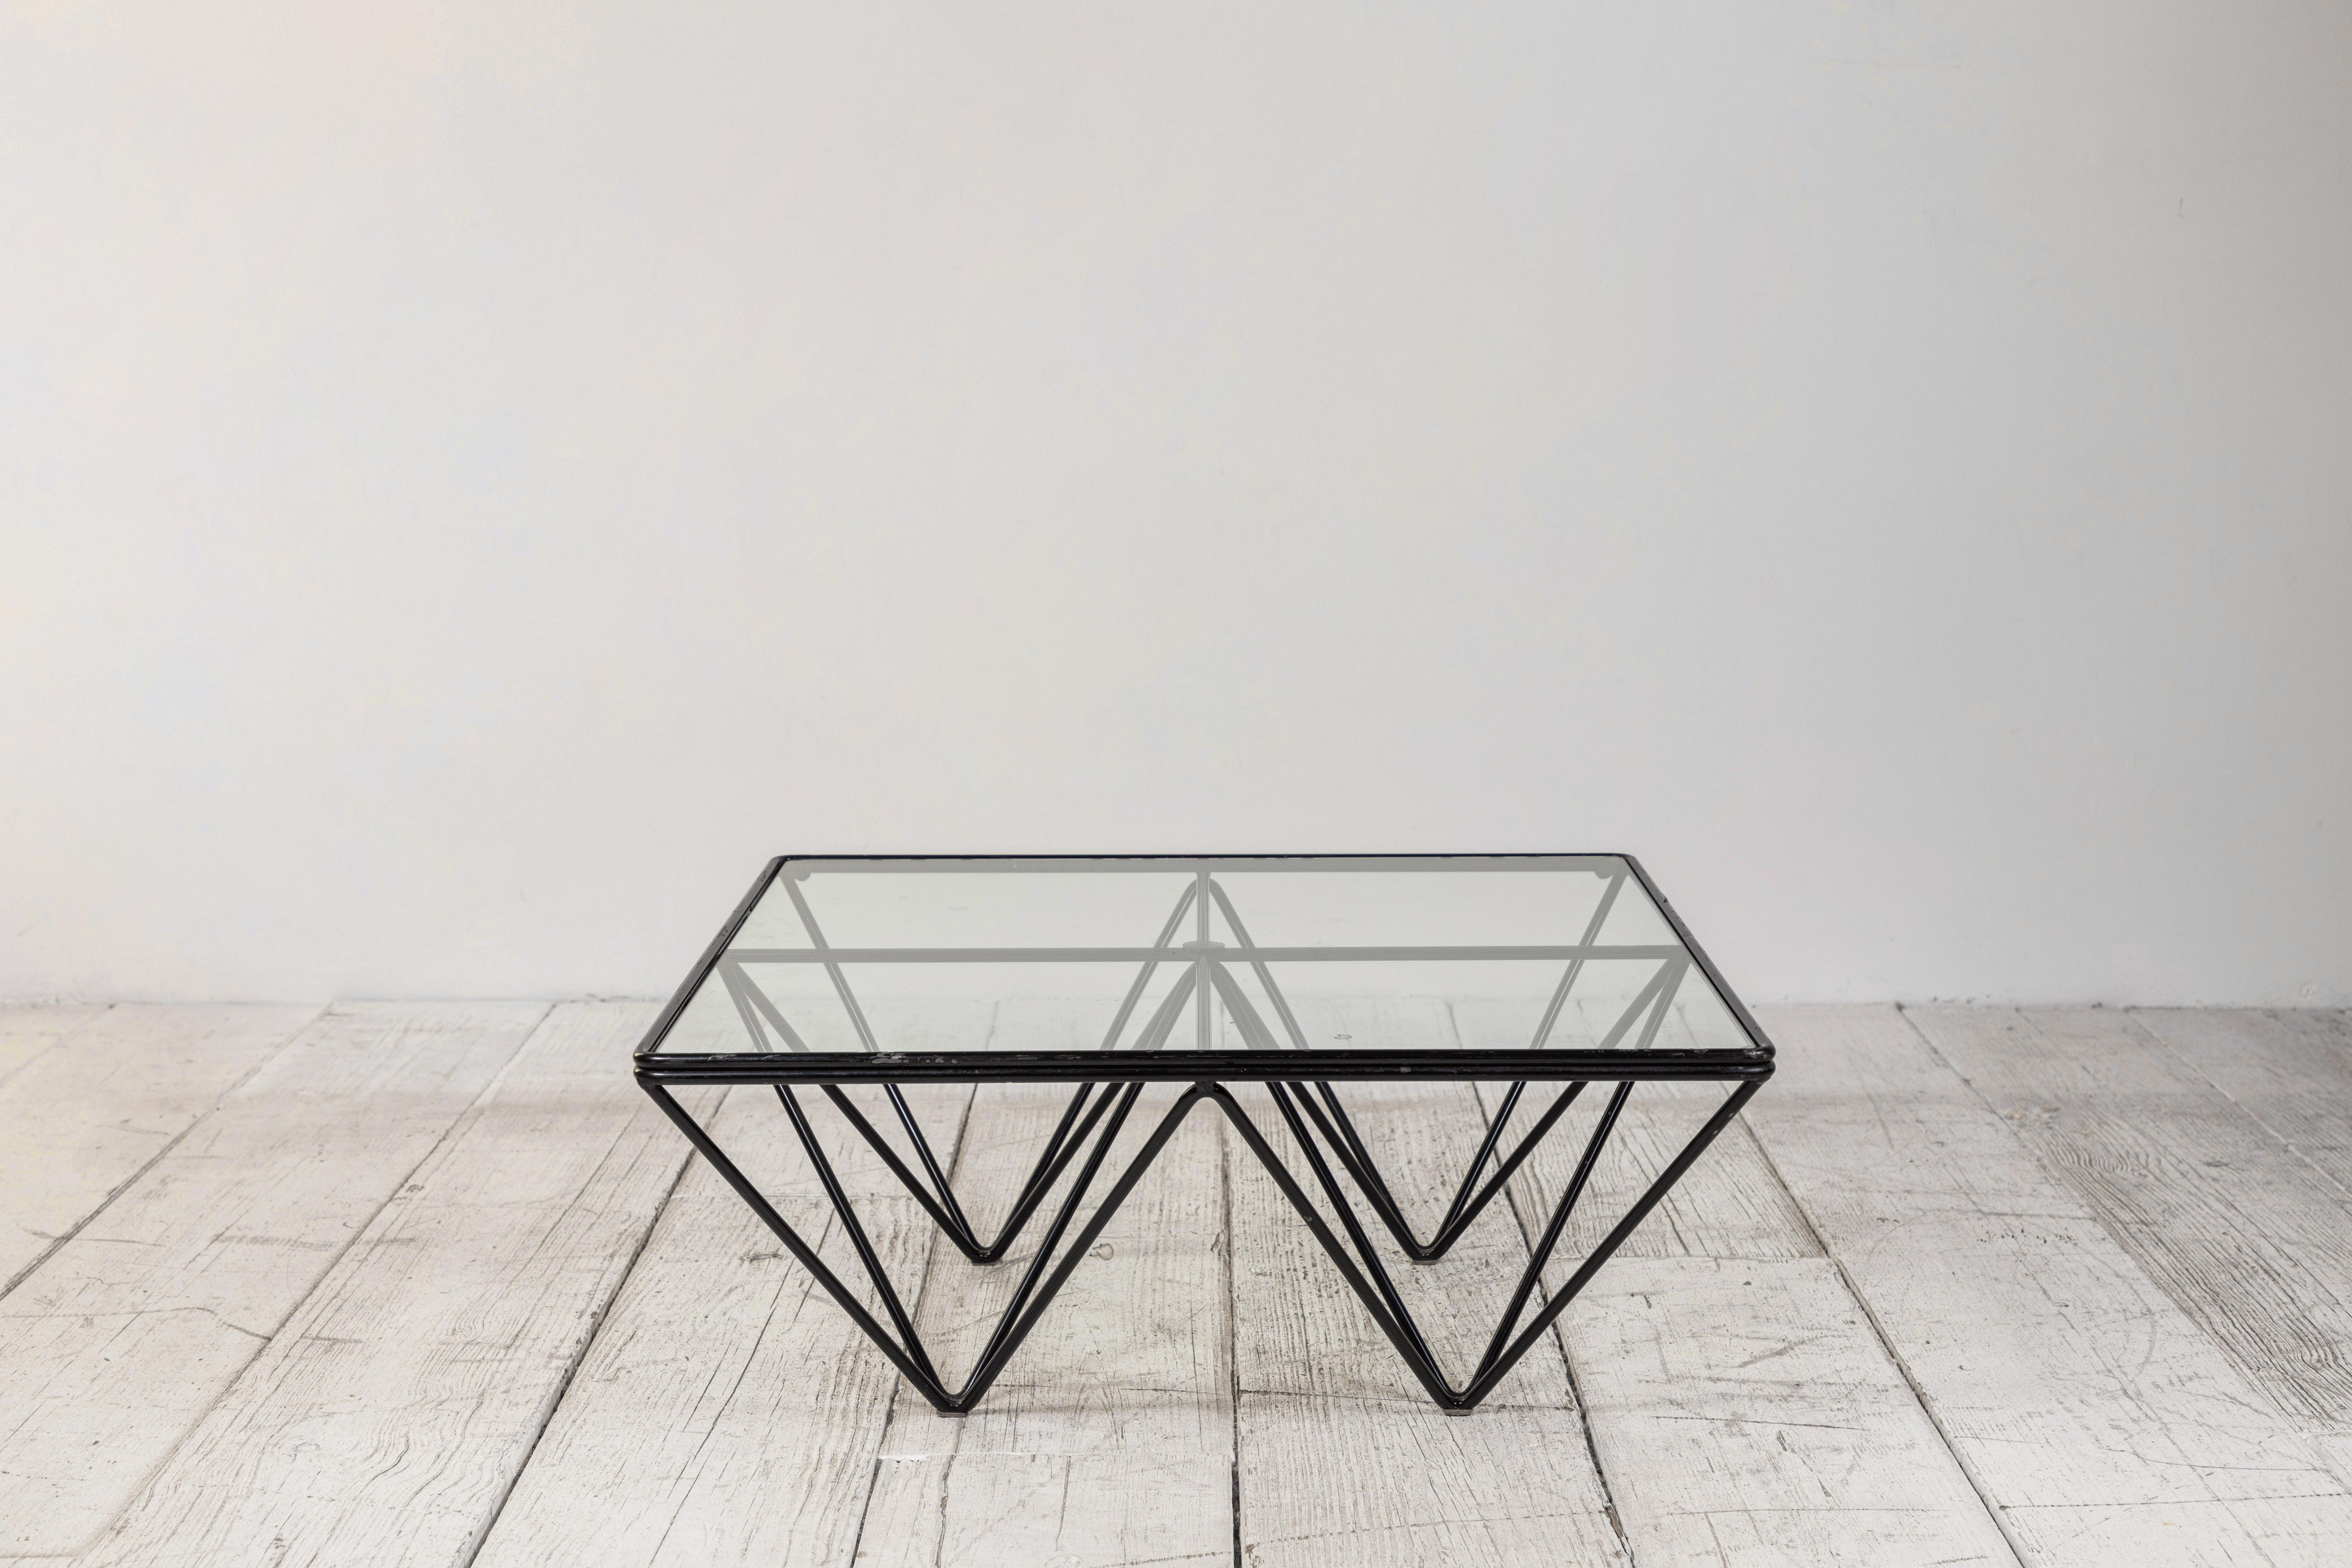 Iconic wire framed and glass topped 'Alanda' coffee table by designer Paolo Piva for B&B Italia, 1981.
Black enameled wire metal frame with clear glass top. In original condition with visible signs of wear consistent with age and usage.
 